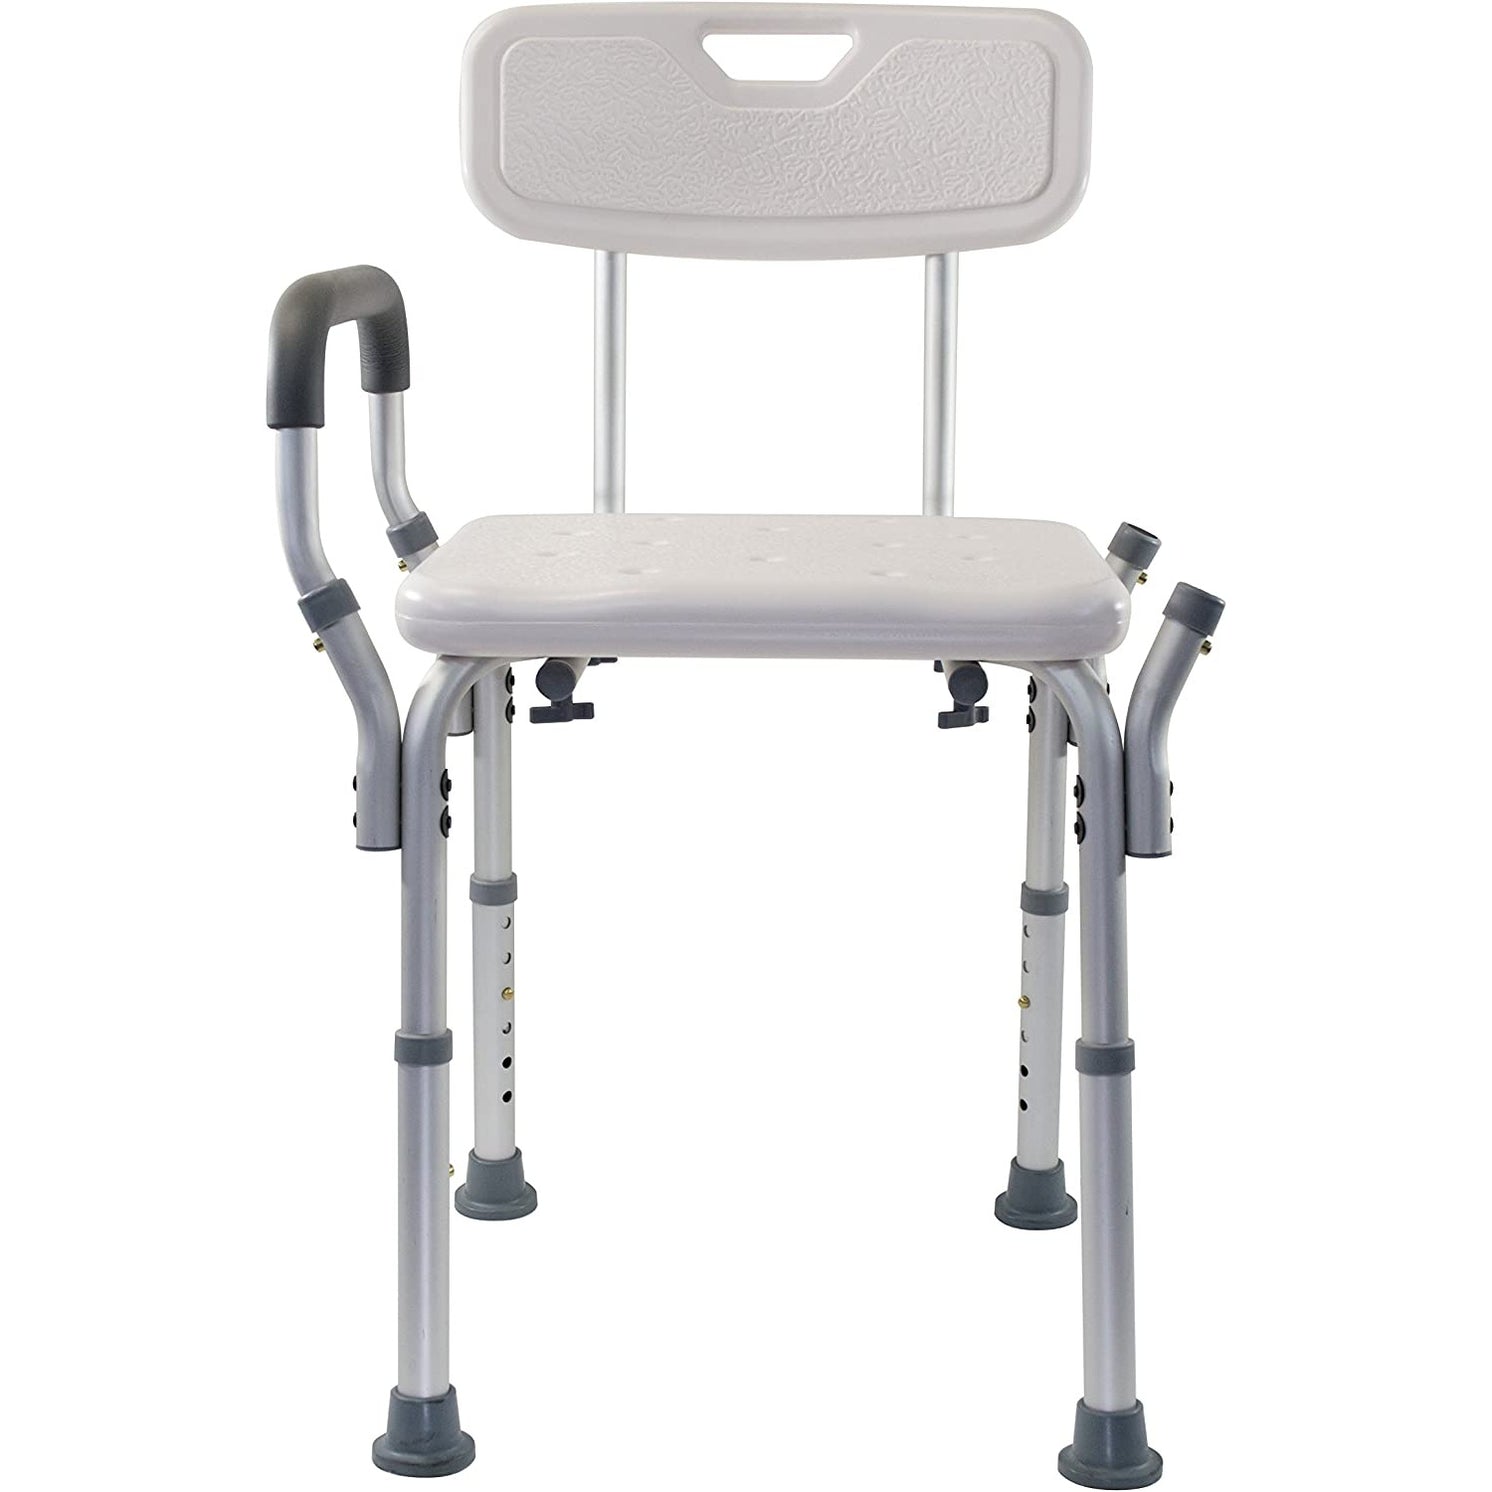 Adjustable Padded Shower Chair for Elderly and Disabled